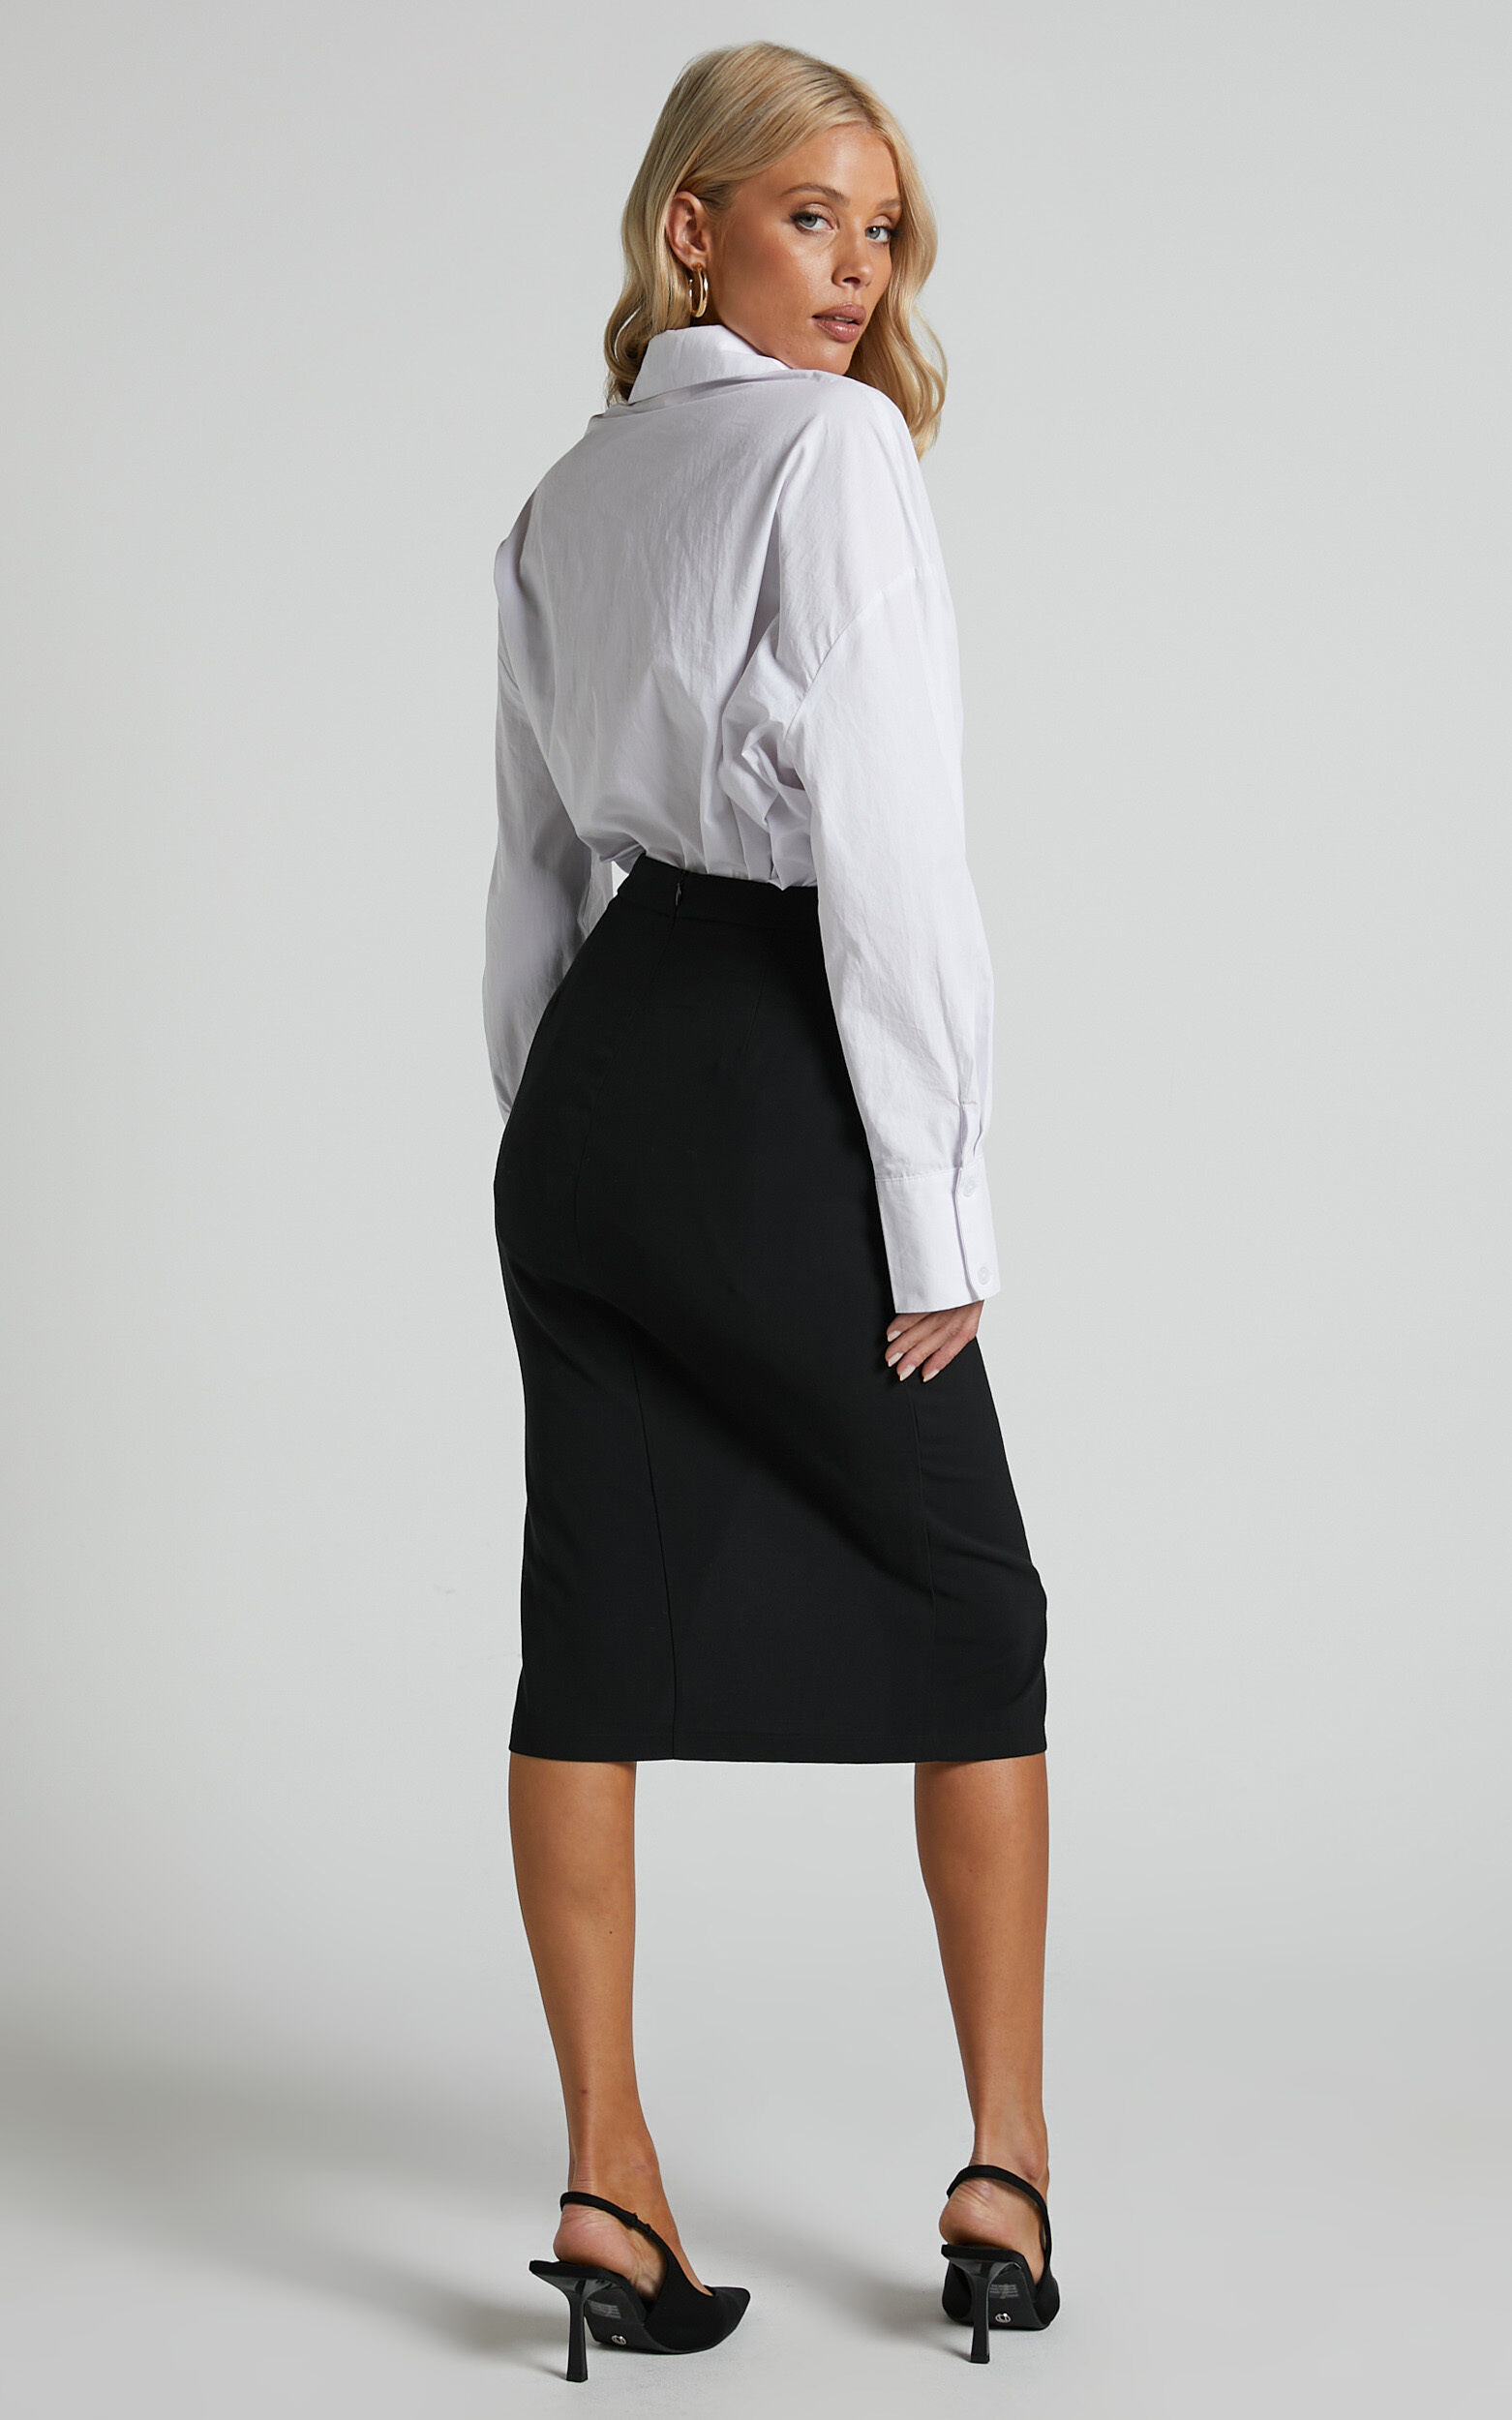 Buy Pencil Skirts Online from Cue